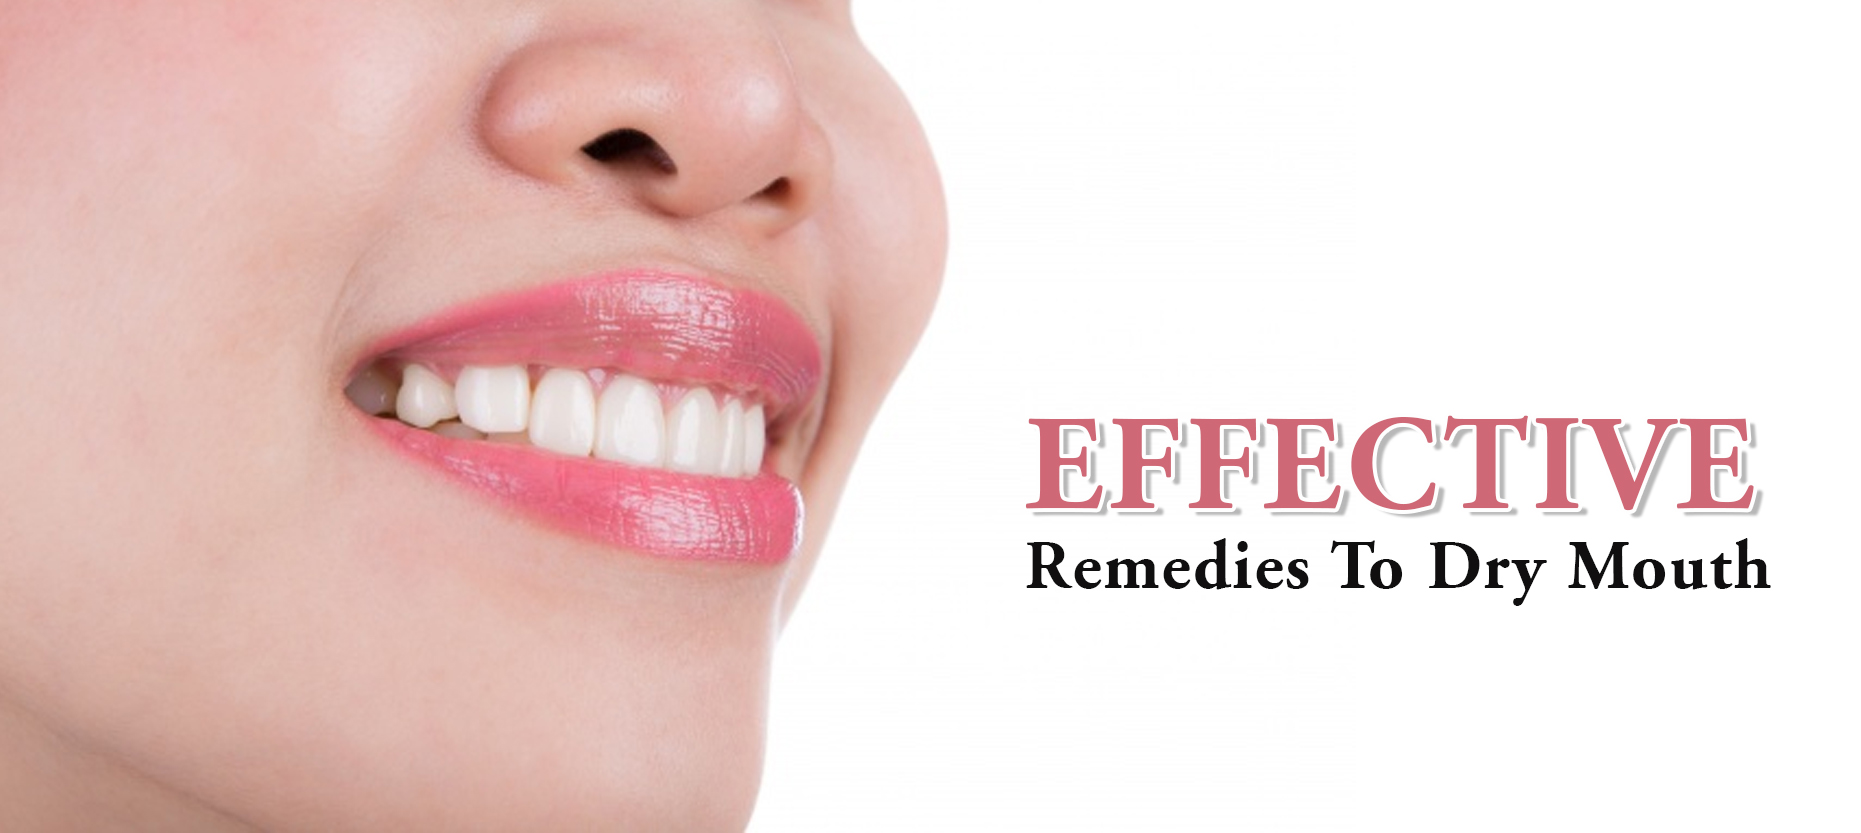 DRY MOUTH RELIEF - 8 NATURAL, EFFECTIVE WAYS